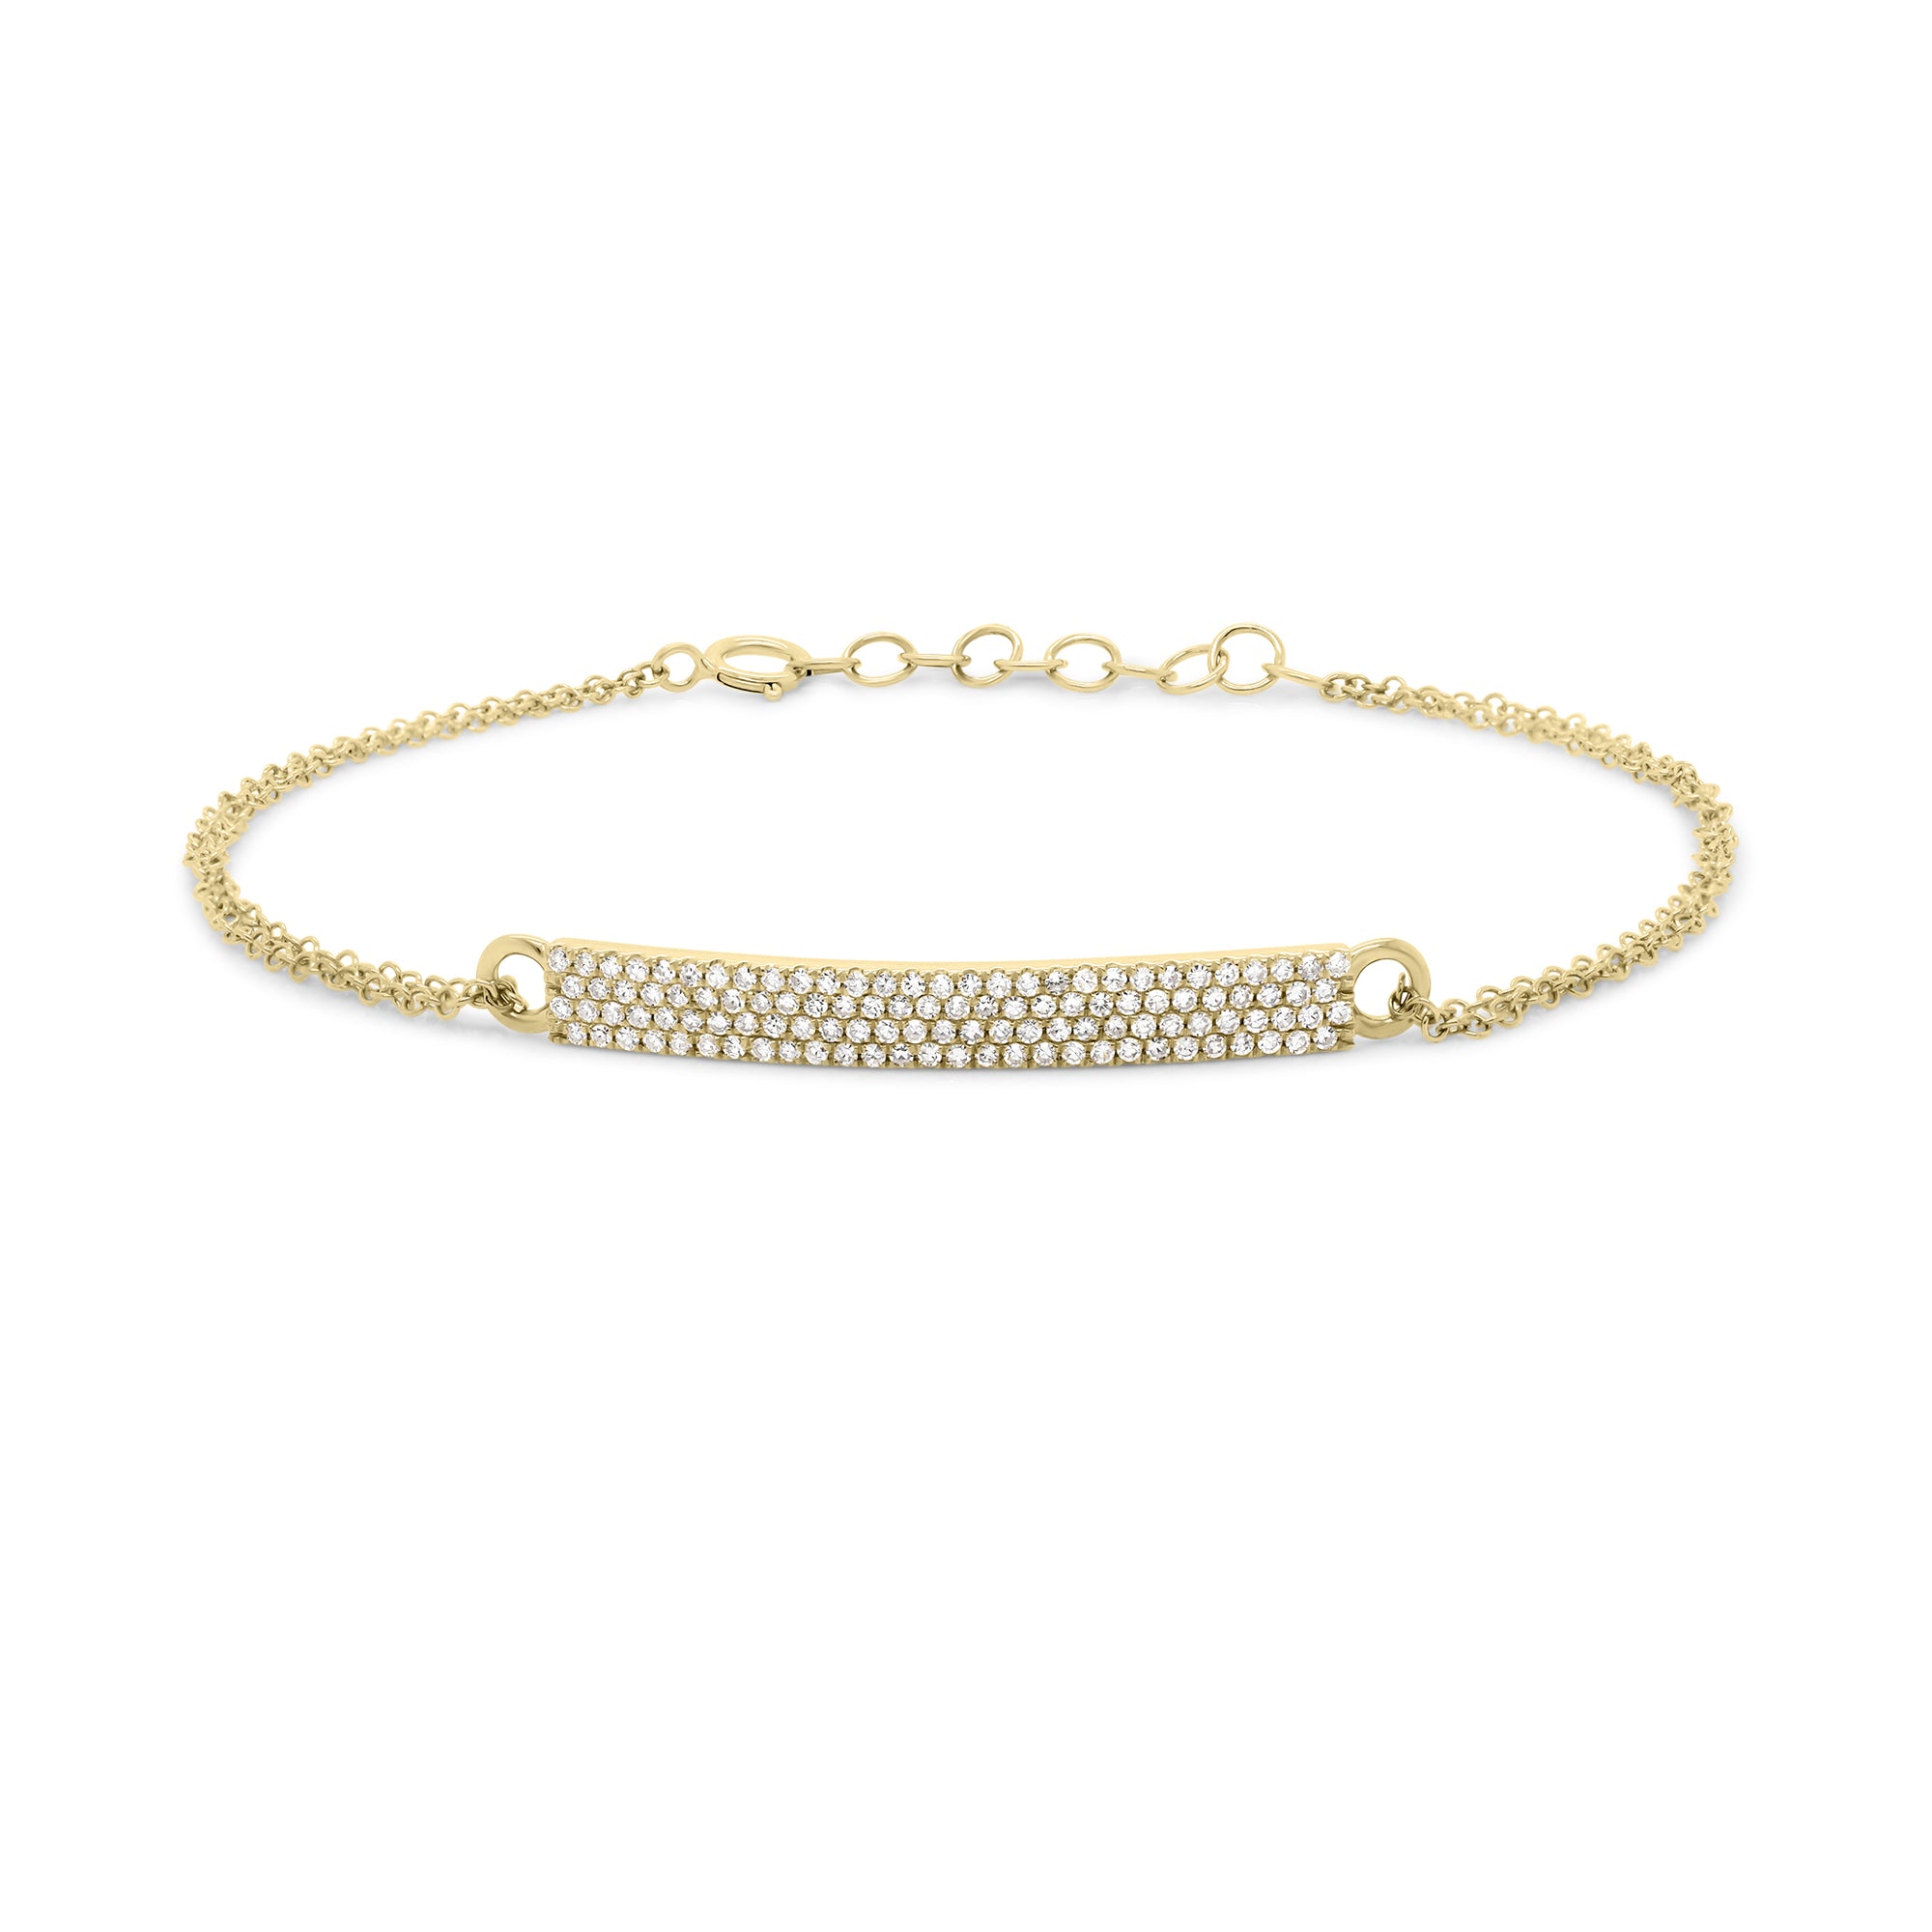 Gold Double Cable Chain Bracelet with Pave Diamond Bar - 14K yellow gold weighing 2.28 grams - 114 round diamonds totaling 0.34 carats